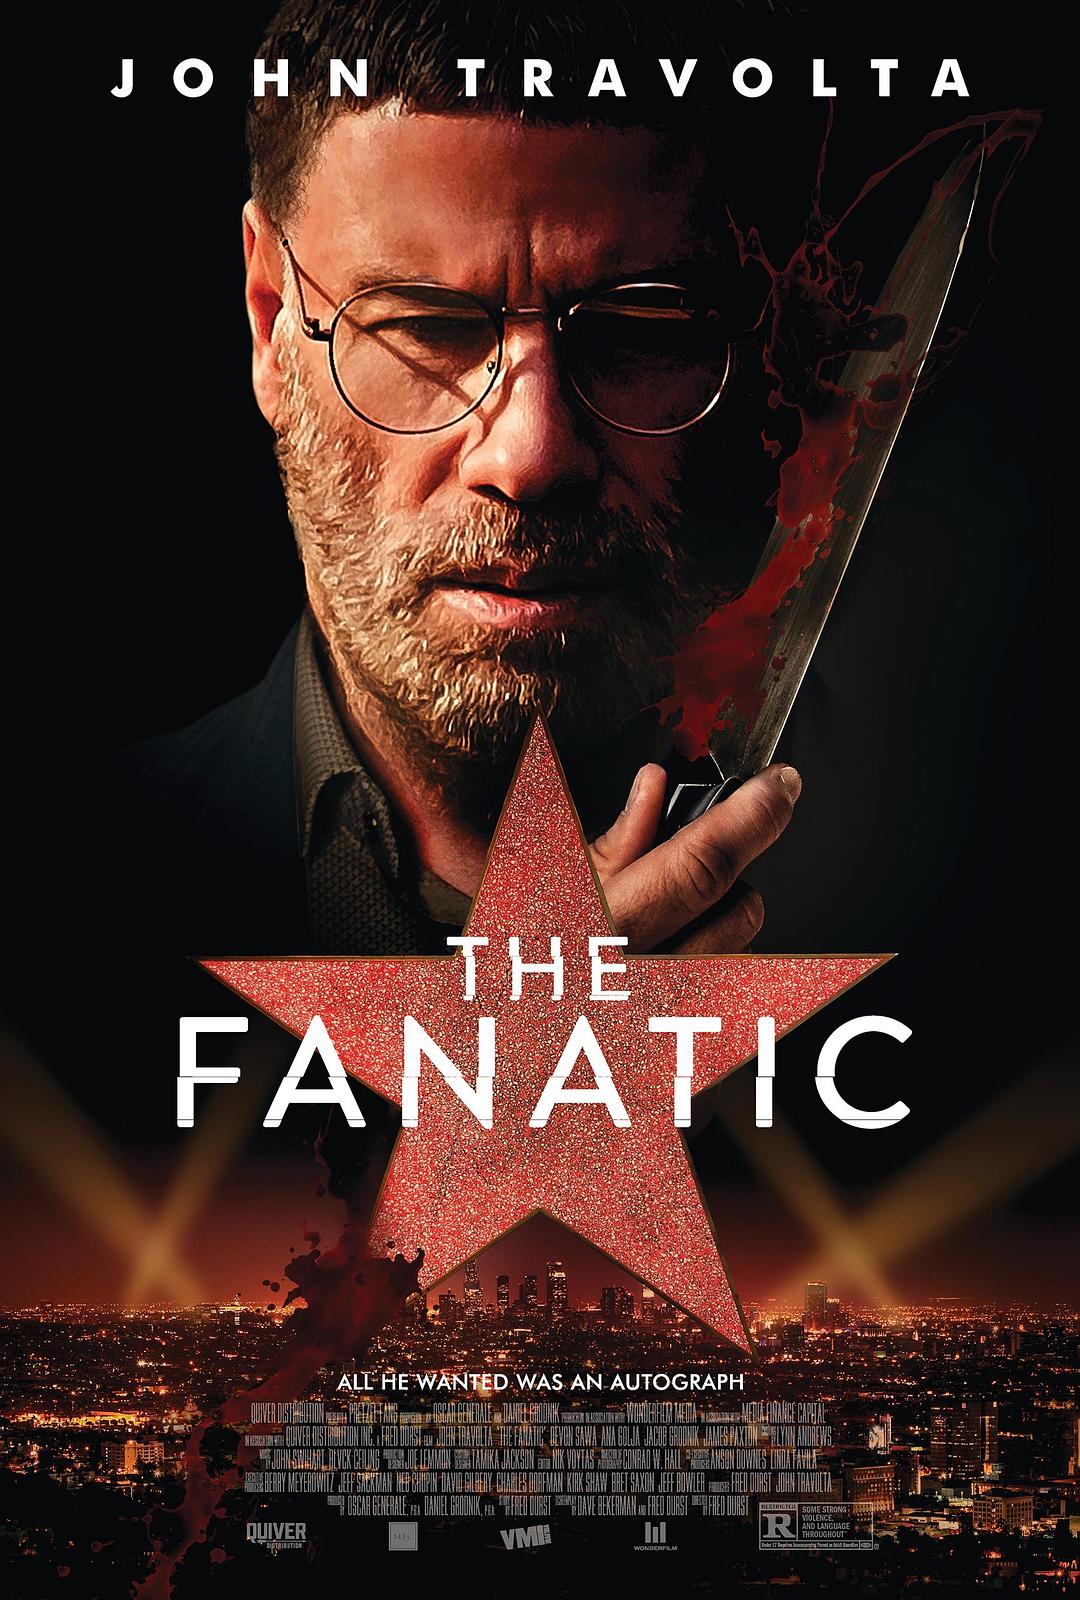  The.Fanatic.2019.1080p.BluRay.x264-ROVERS 5.47GB-1.png